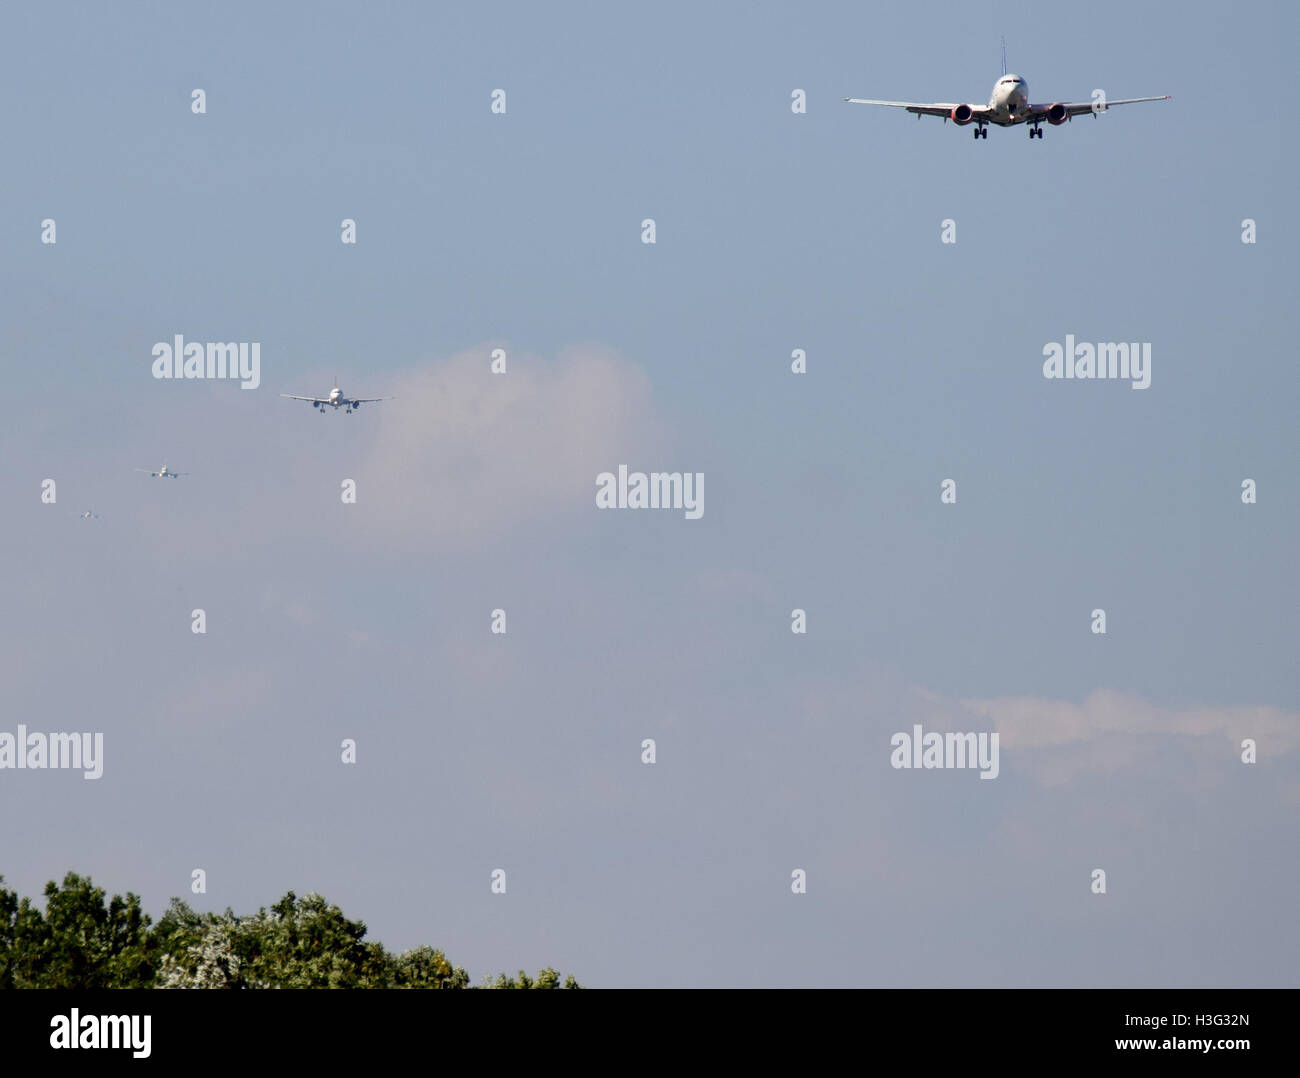 Four aircraft on the approach to LHR runway 09L 10Sep2015 arp Stock Photo